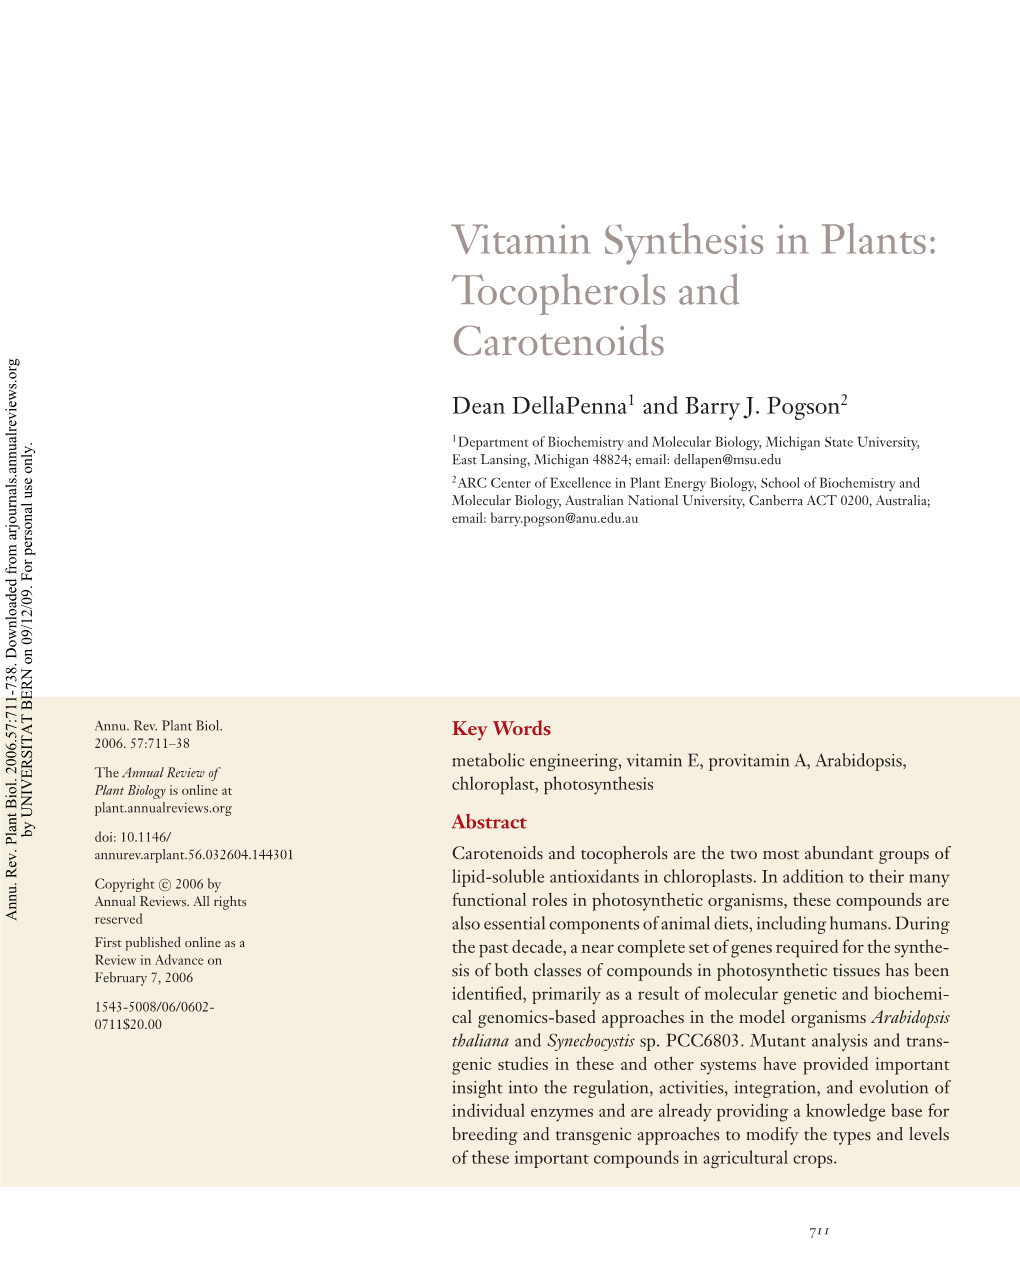 Vitamin Synthesis in Plants: Tocopherols and Carotenoids